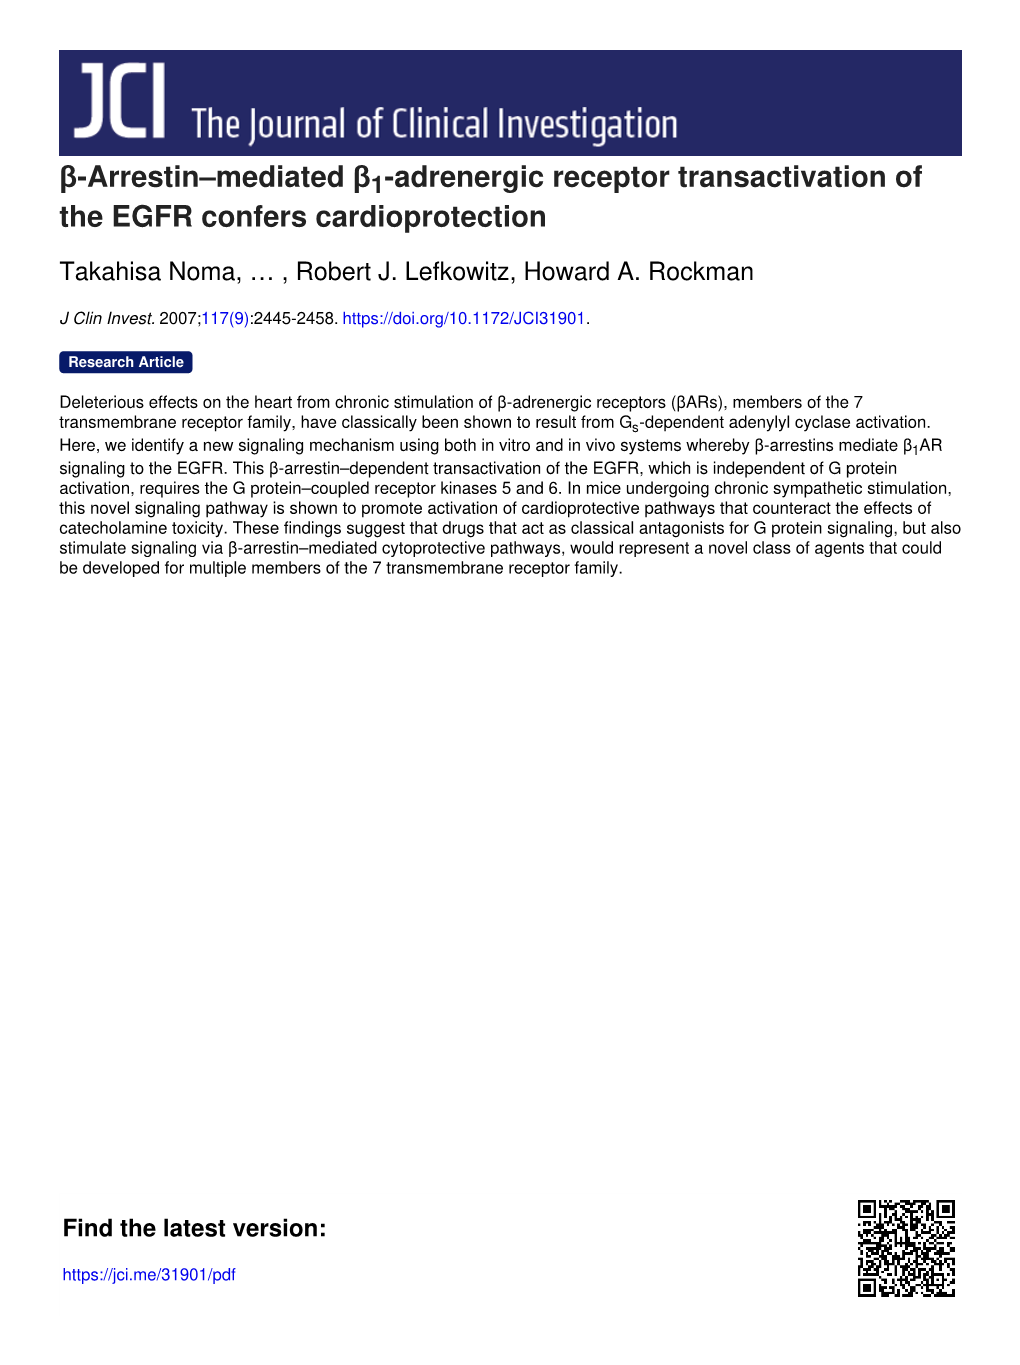 Adrenergic Receptor Transactivation of the EGFR Confers Cardioprotection